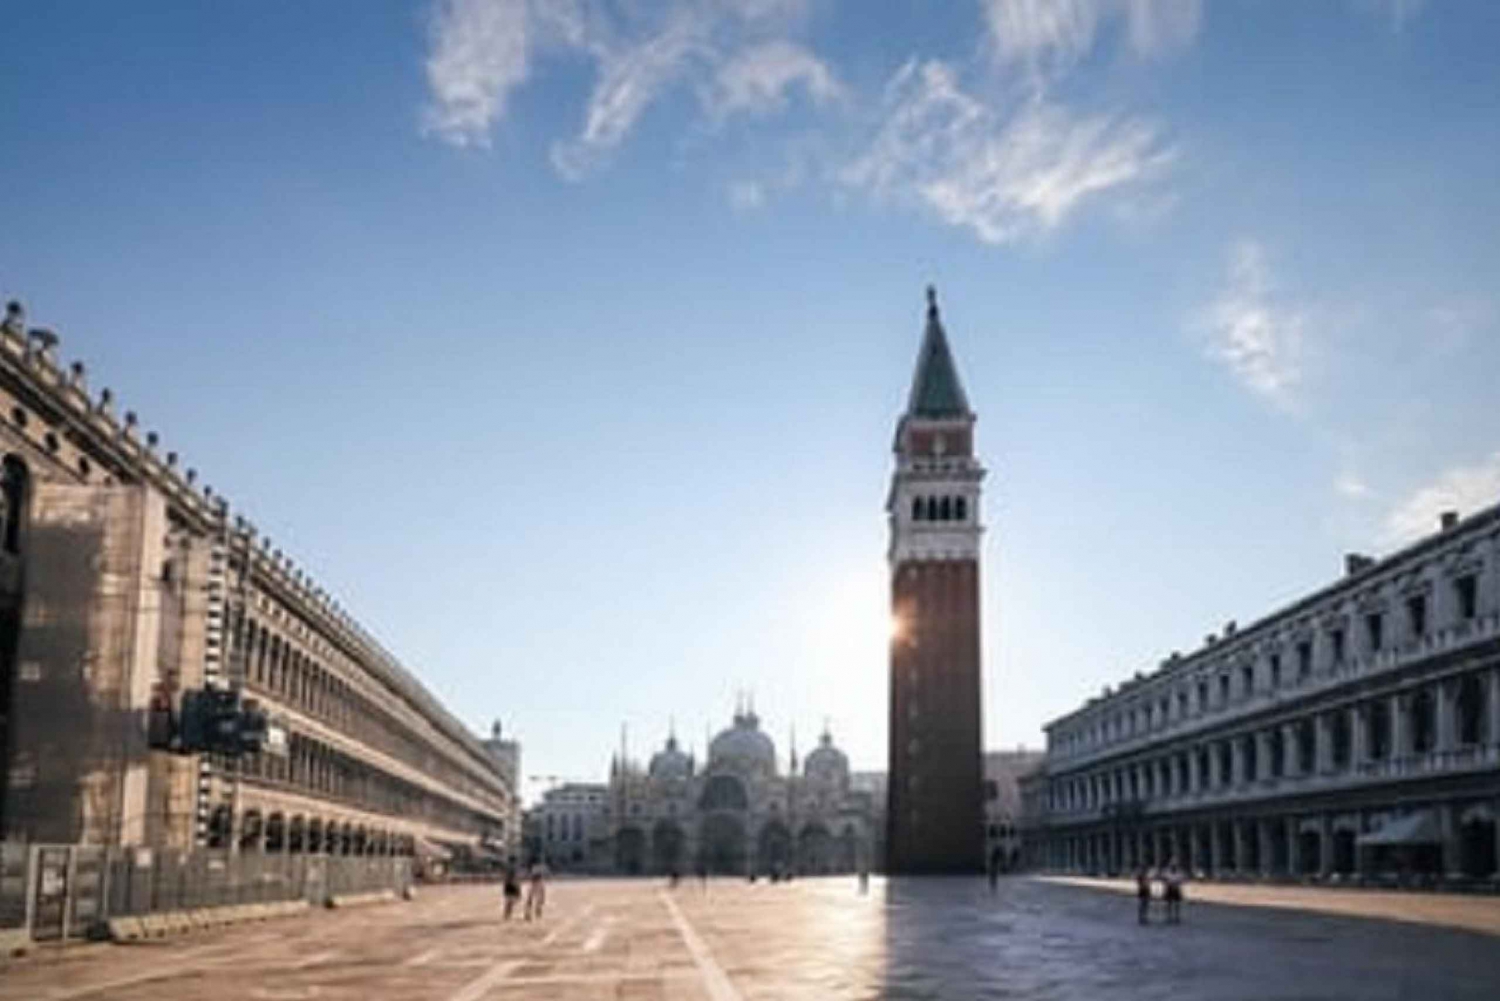 Venice: Doge's Palace and Basilica Skip-the-Line Guided Tour